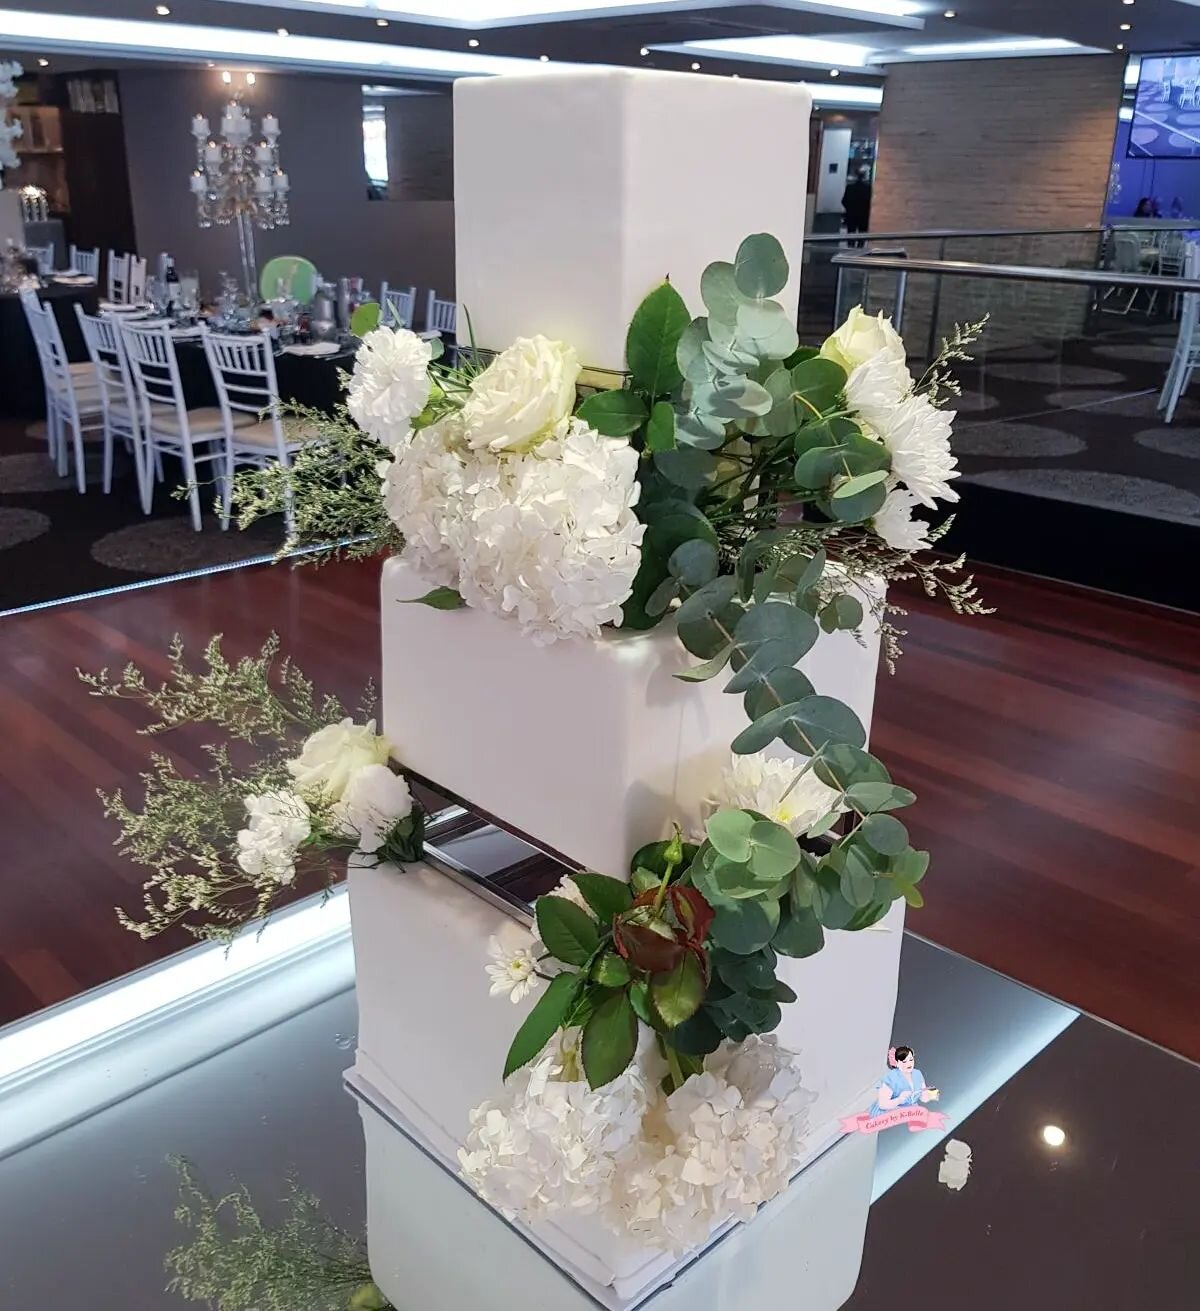 This week is a big one, it's all about weddings! 

Flowers by @verdaflore 

#cakerybykbelle #weddingcake #weddingcakessydney #wedding #weddingcakewithflowers #weddingcakes #cakeseparator #weddingcakesofinstagram #sydneyweddingcakes #sydneycakes #cake